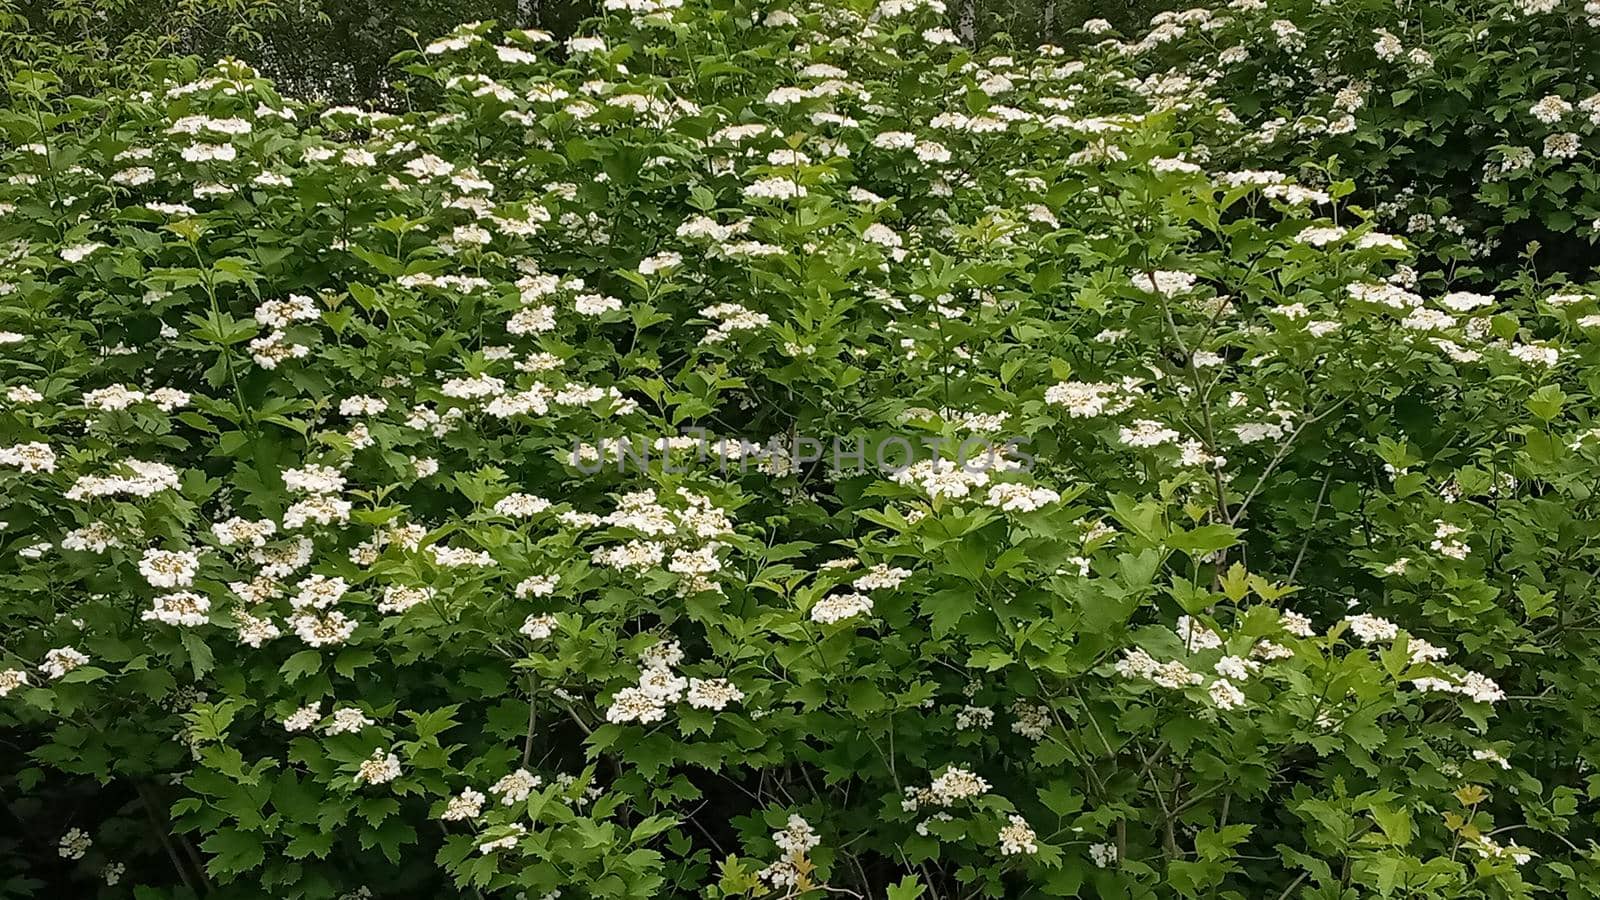 Kalina flowers. Viburnum opulus In Russia the Viburnum fruit is called kalina and is considered a national symbol. Kalina derived from kalit or raskalyat, which means to make red-hot.